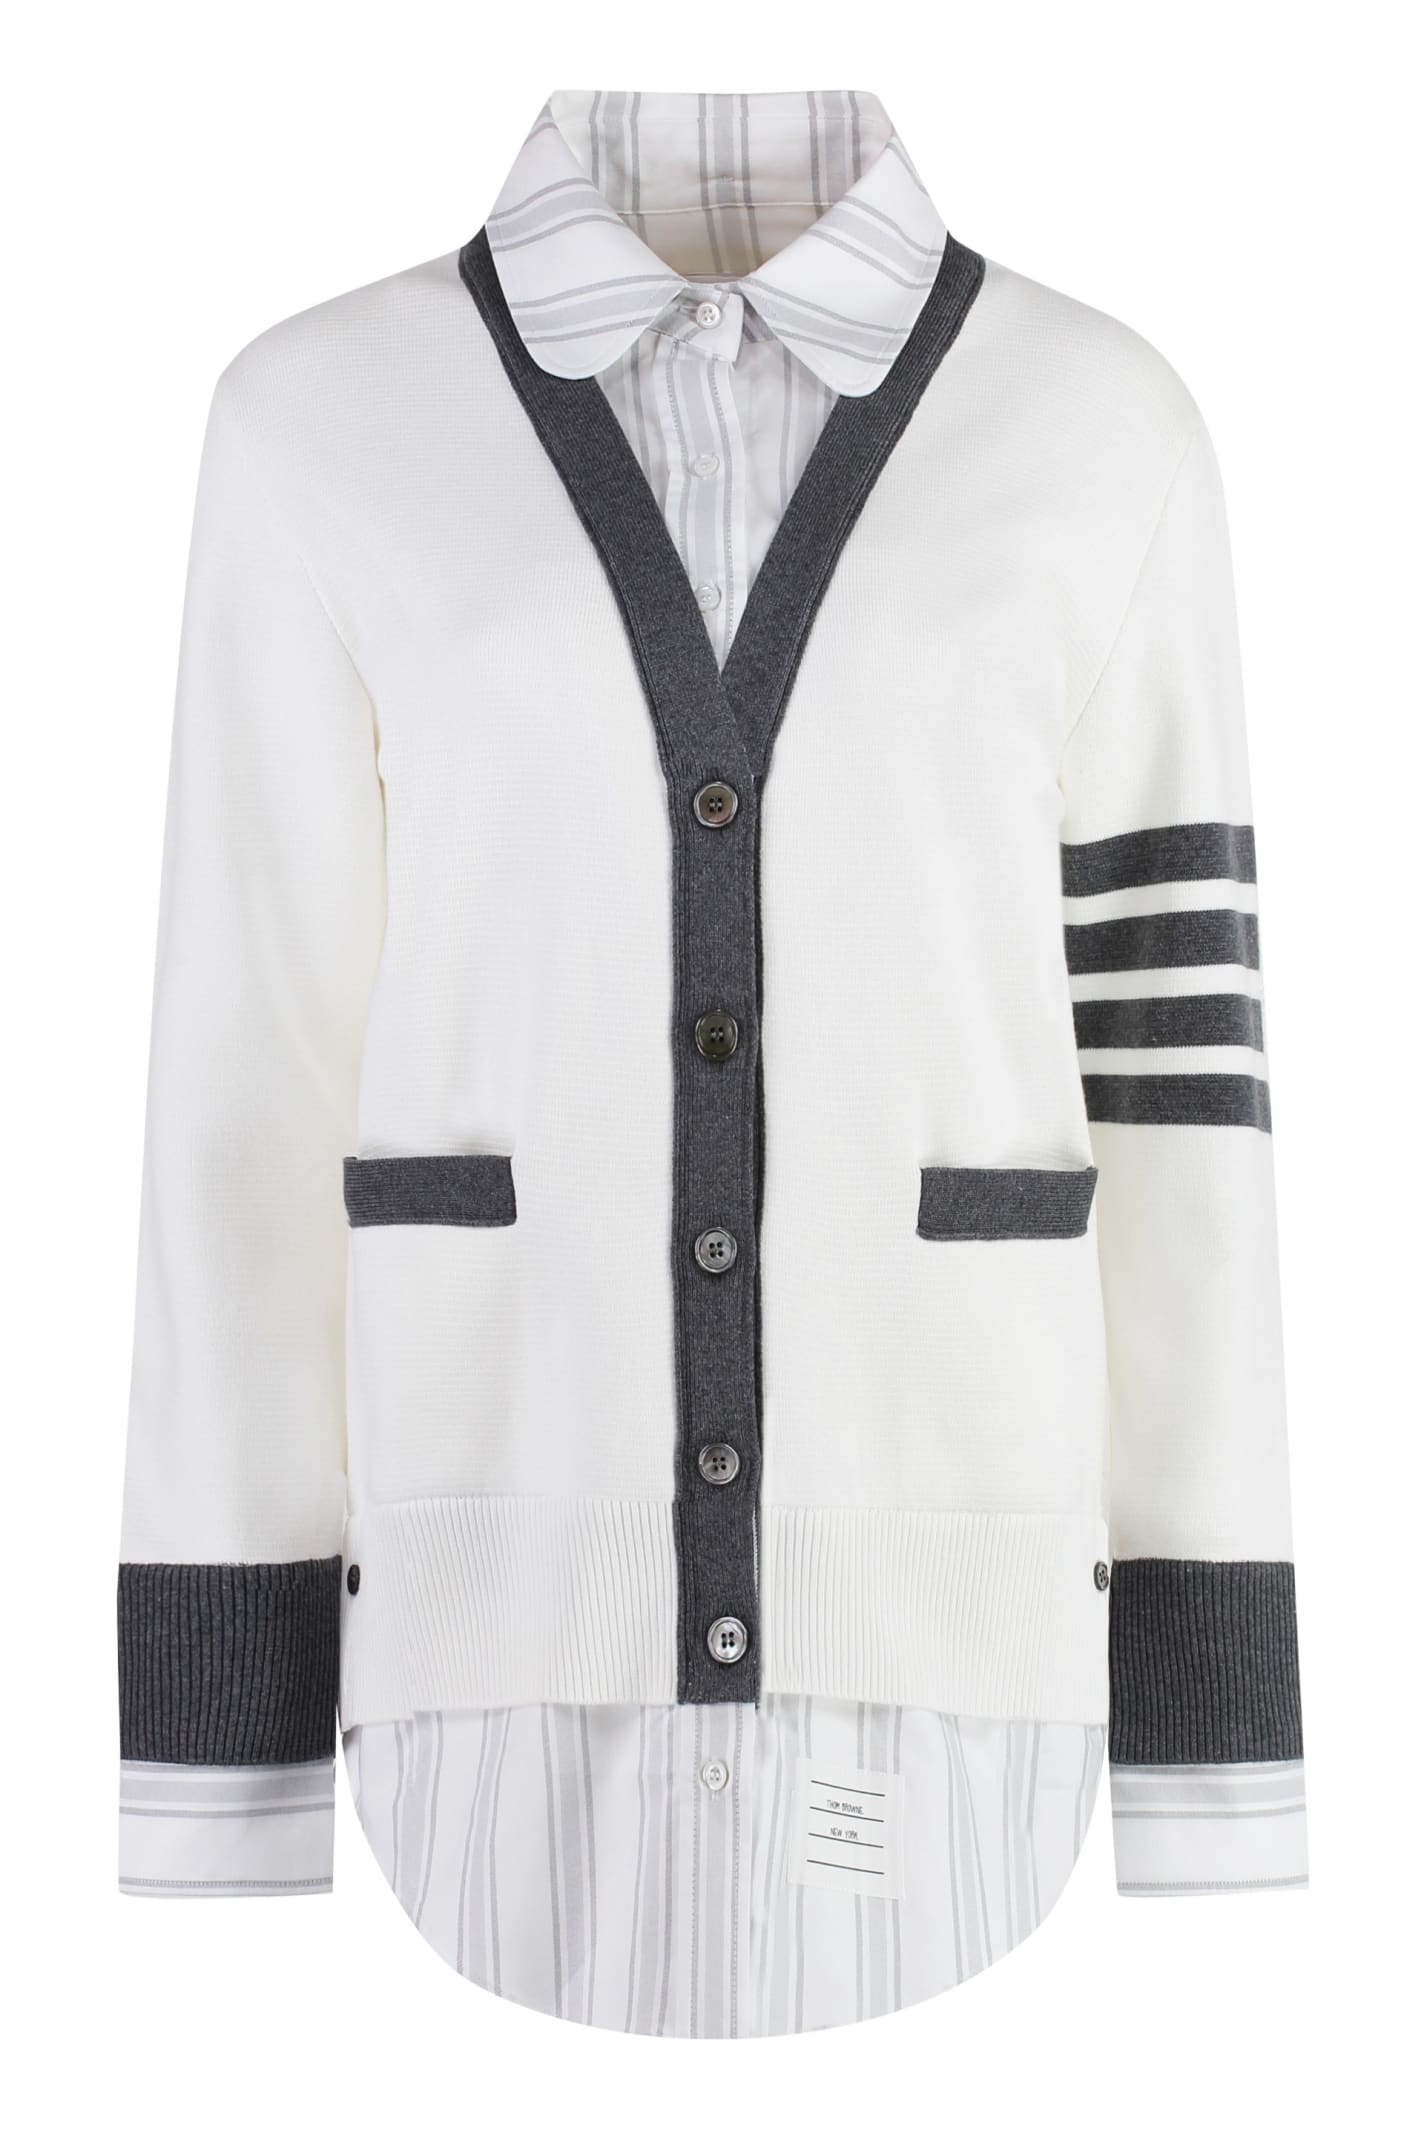 Thom Browne Knit Cardigan In White